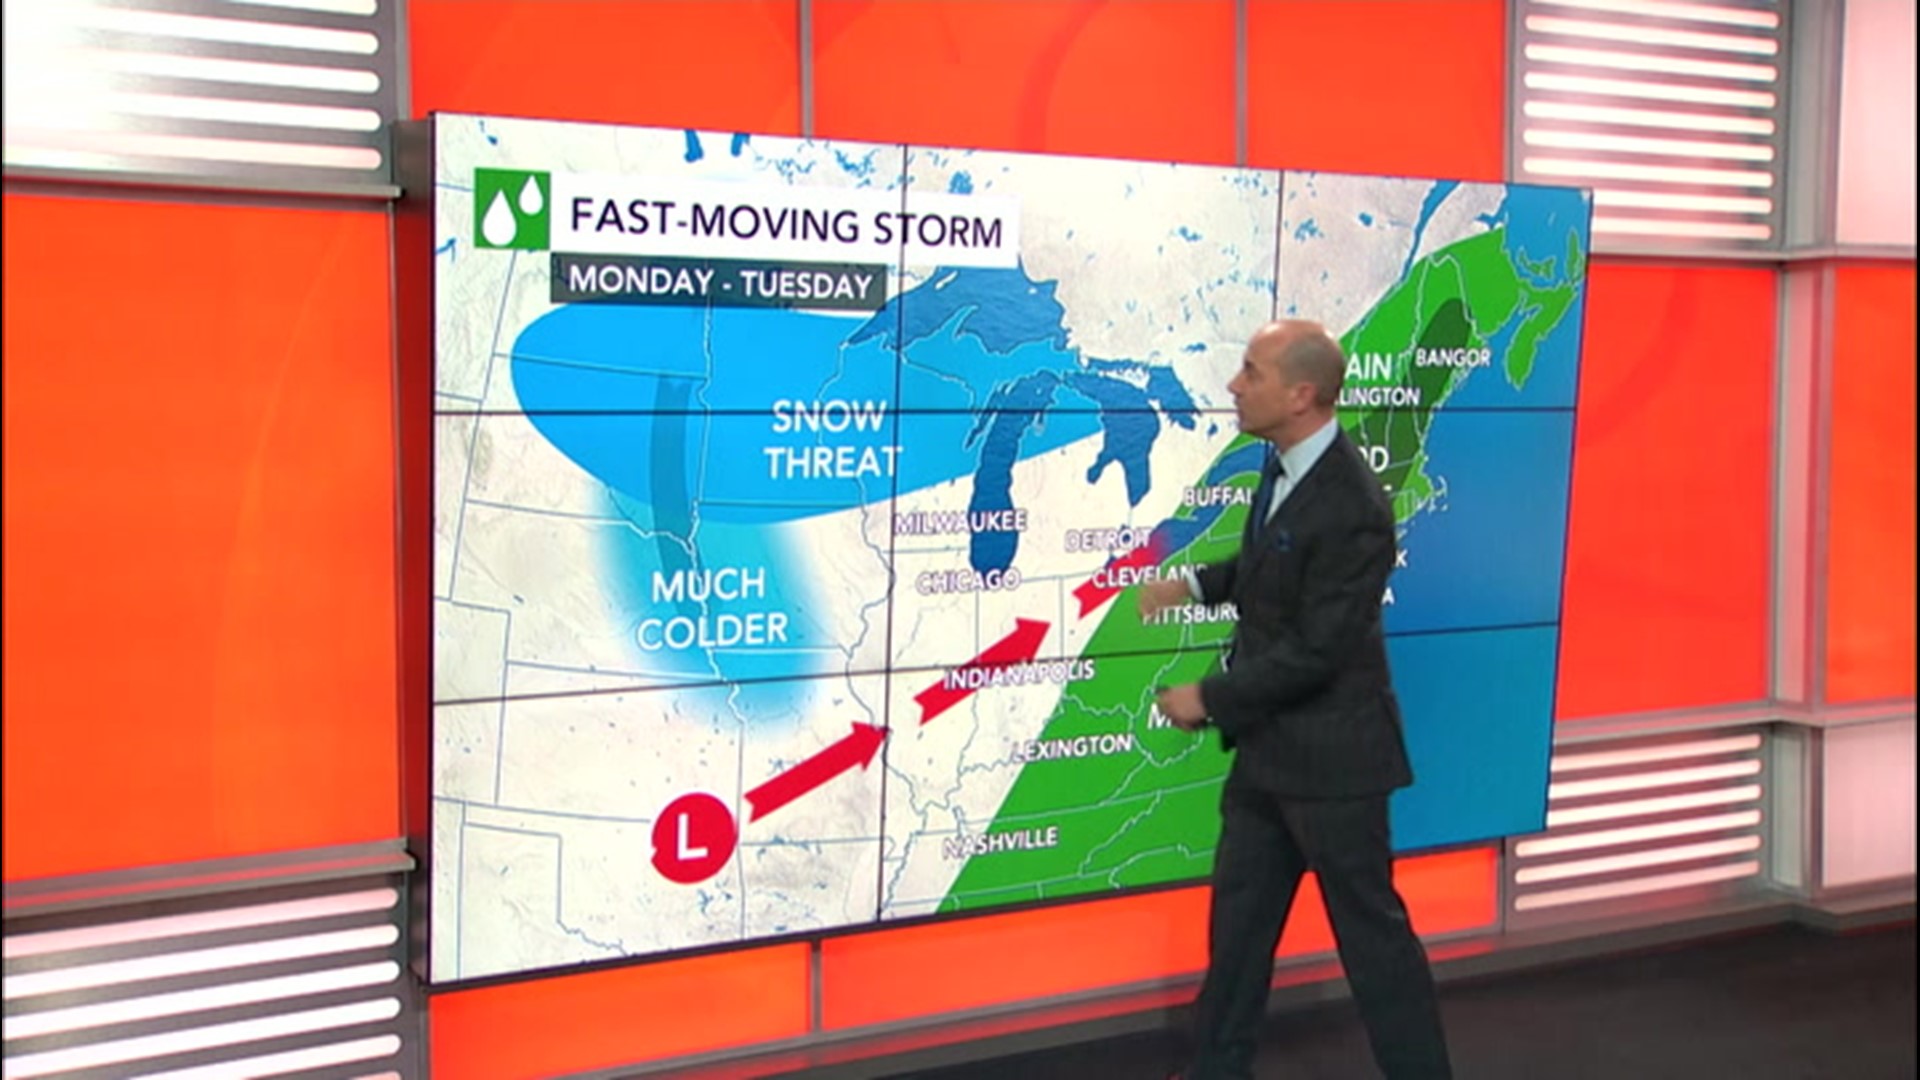 AccuWeather Chief Broadcast Meteorologist Bernie Rayno says areas from the central U.S. to the Northeast will have a significant storm to contend with early next week.